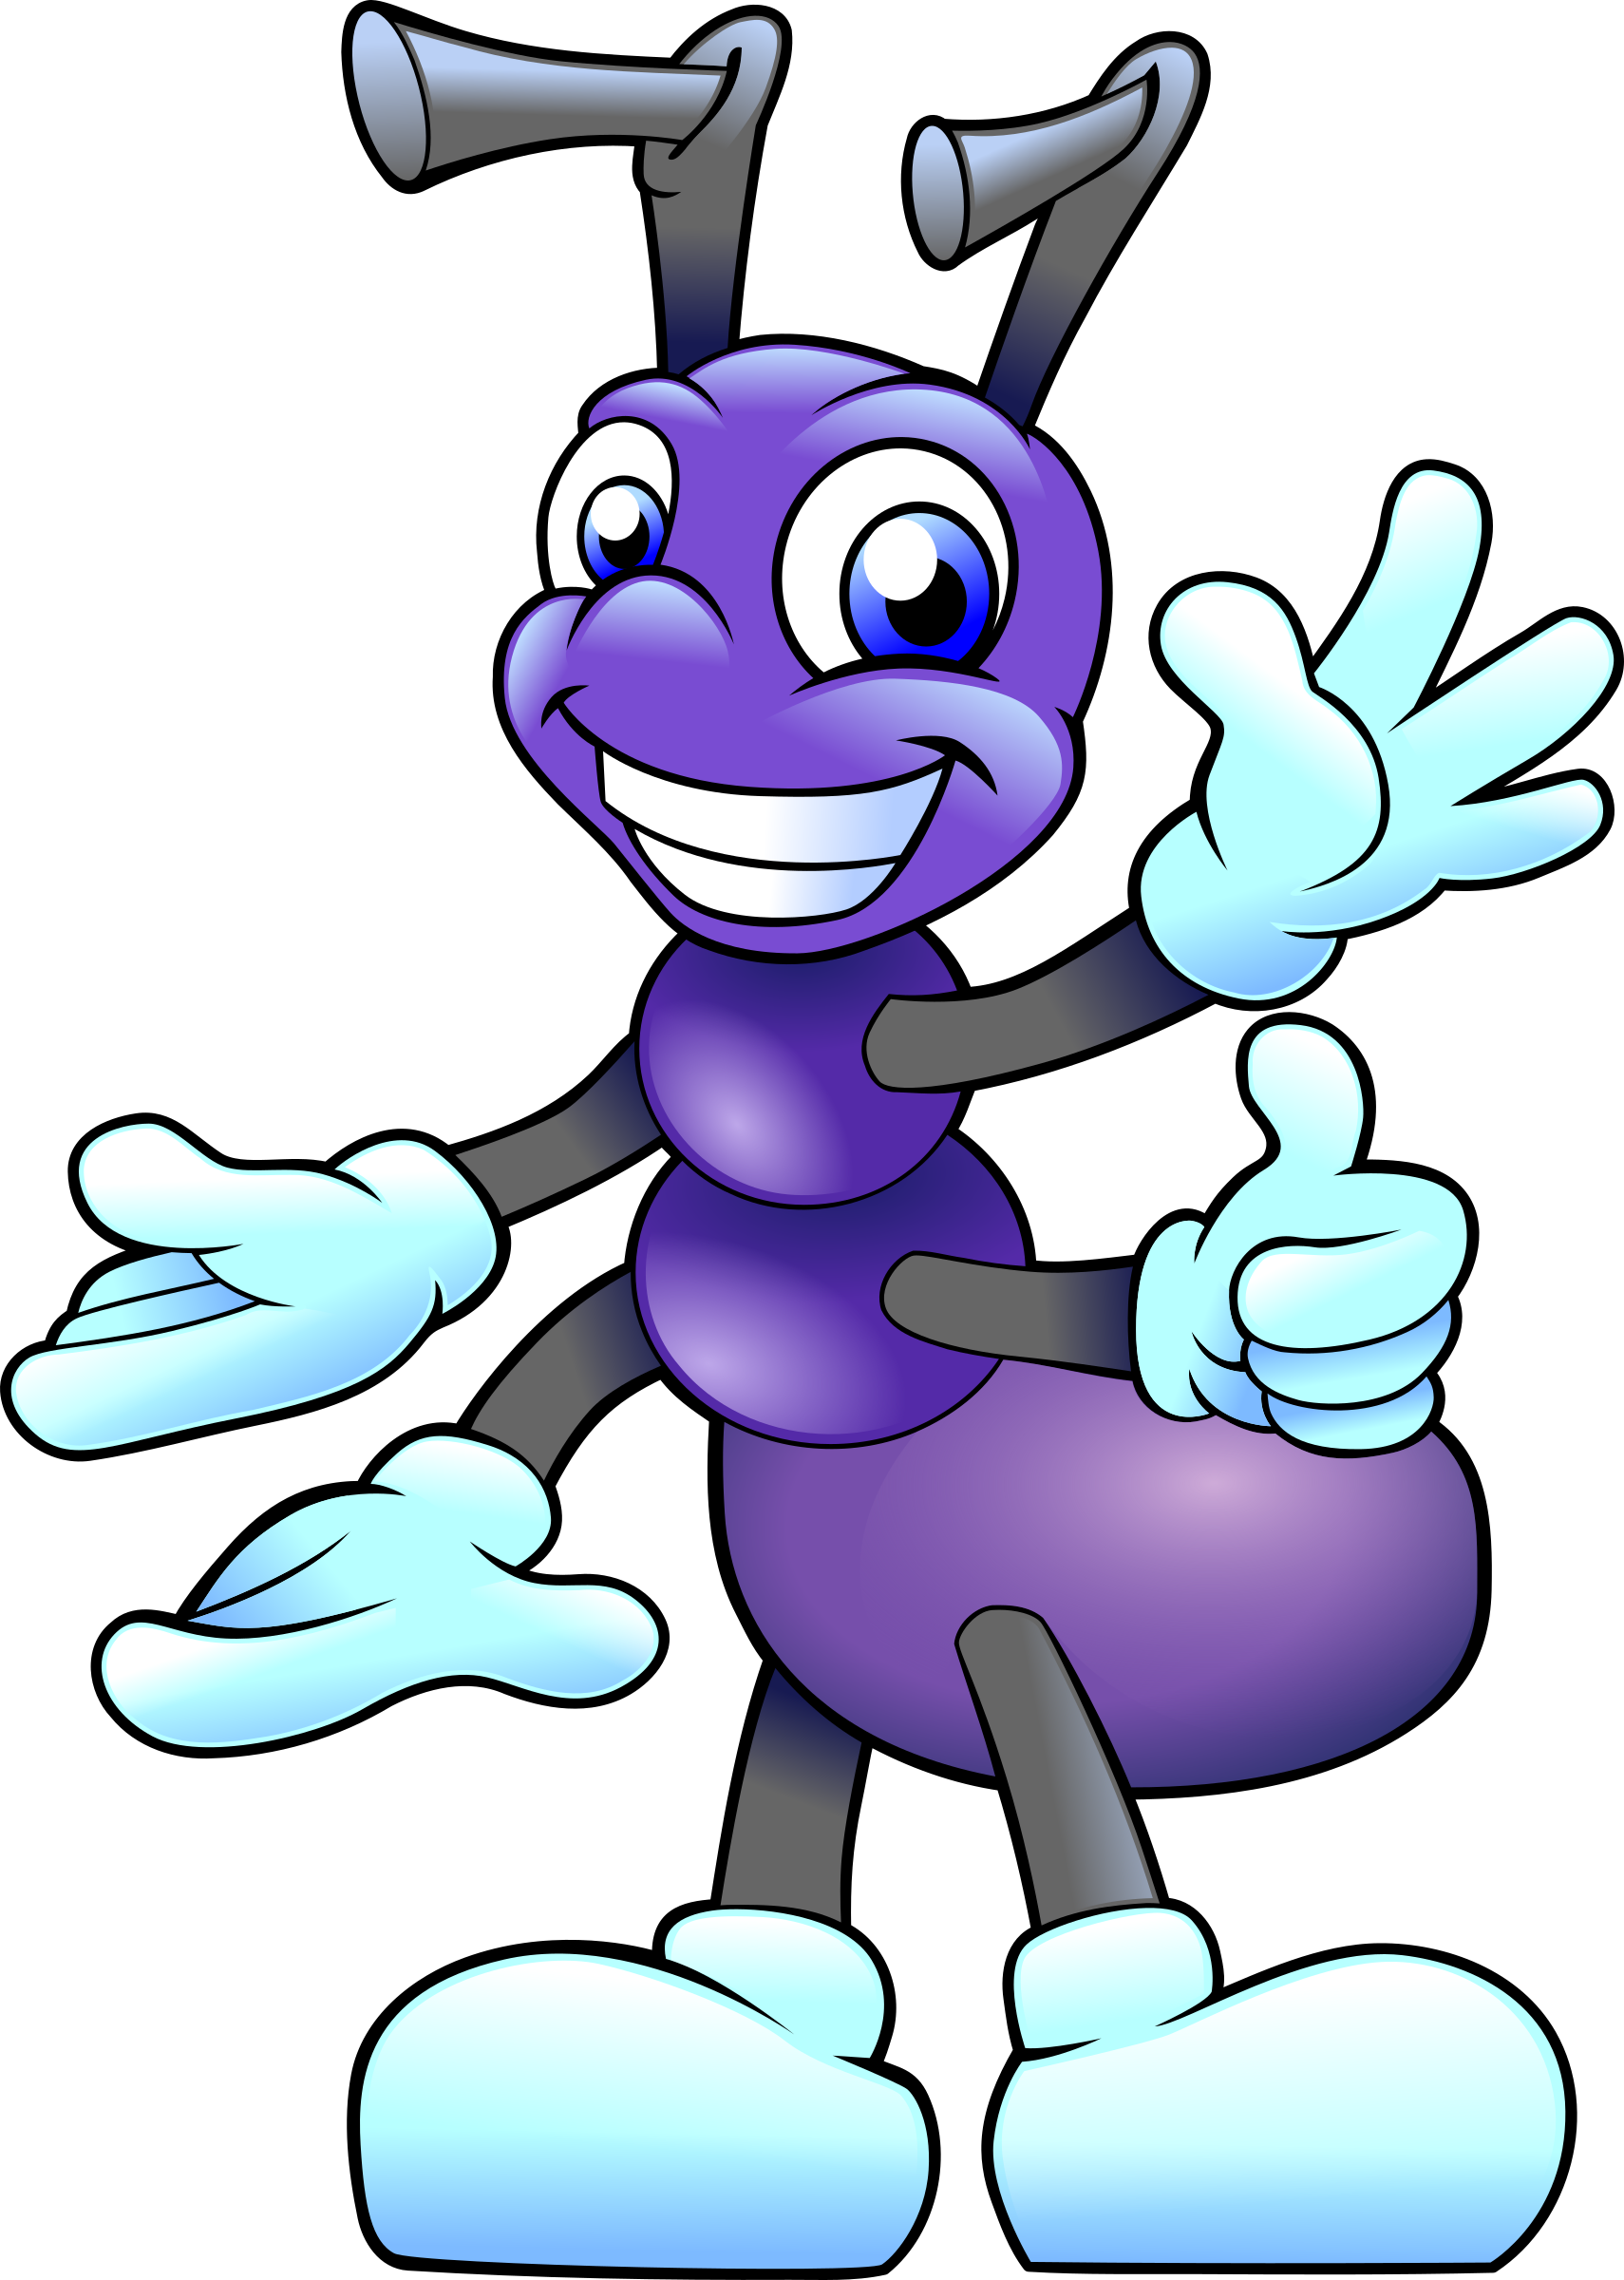 Purple by schade animaci. Ant clipart friendly